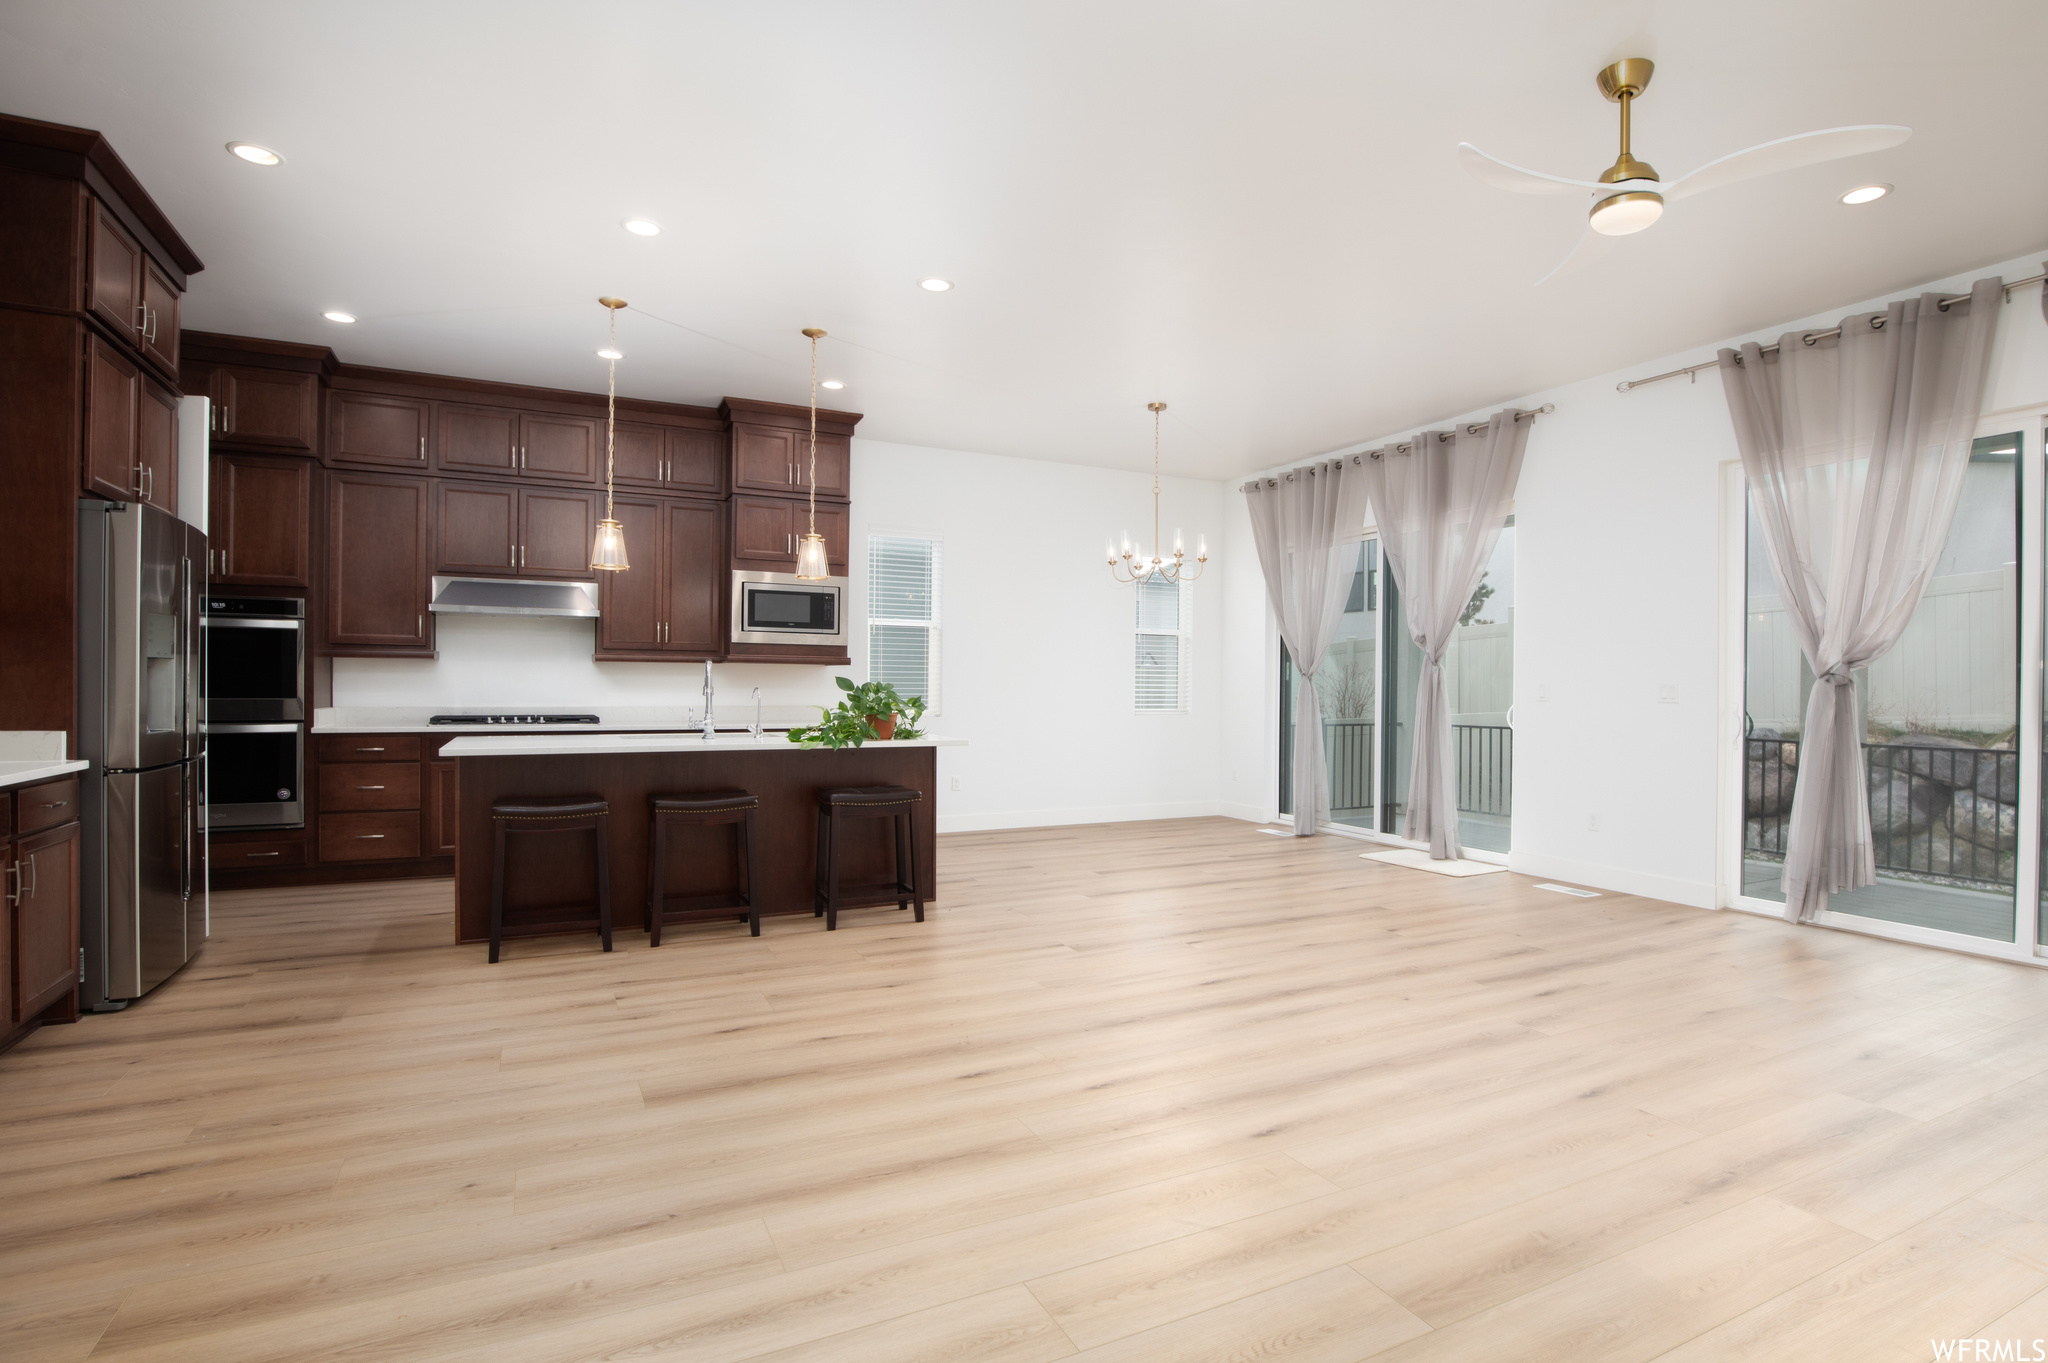 Kitchen featuring light hardwood / wood-style flooring, pendant lighting, ceiling fan with notable chandelier, and appliances with stainless steel finishes